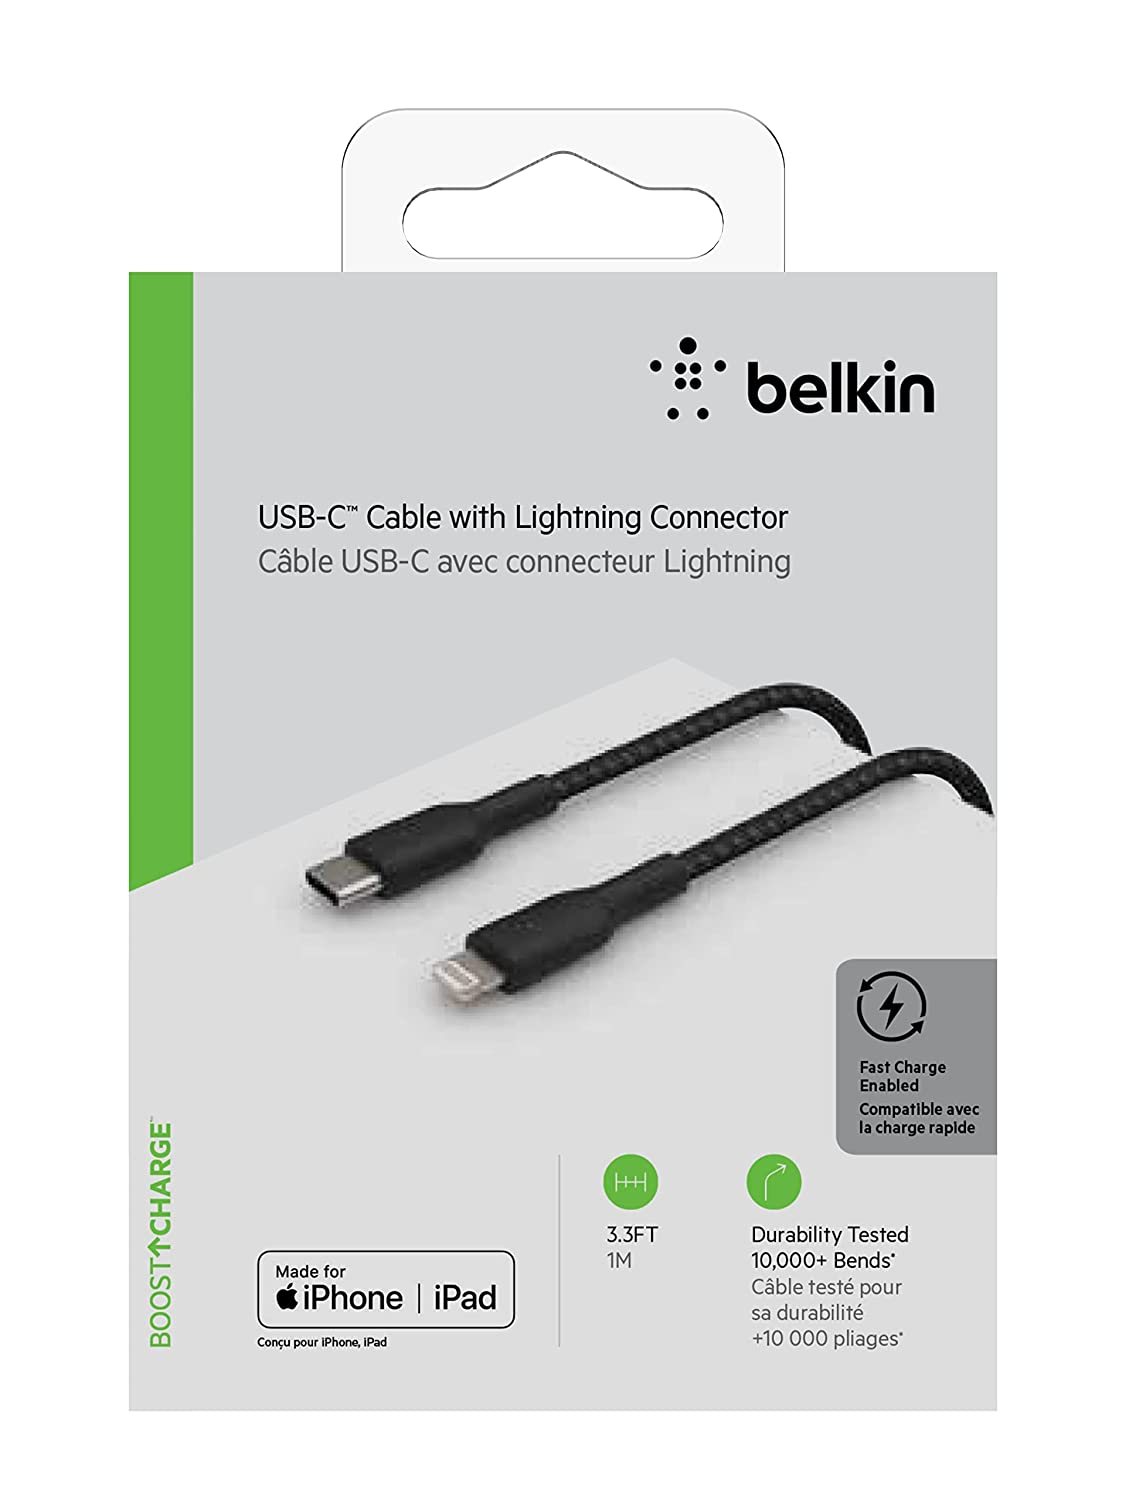 Belkin's new Lightning-enabled power bank comes with Apple